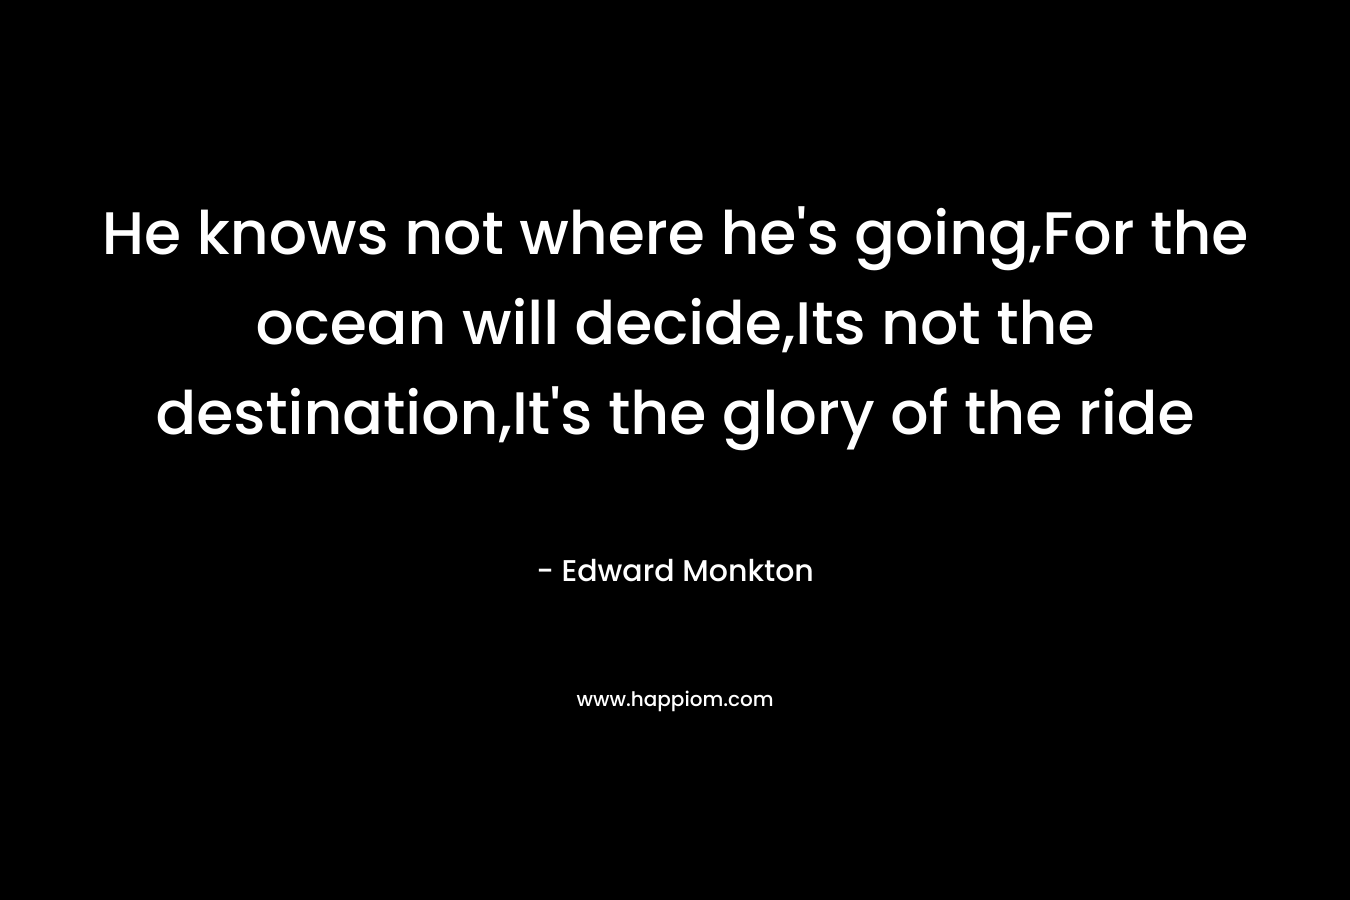 He knows not where he's going,For the ocean will decide,Its not the destination,It's the glory of the ride